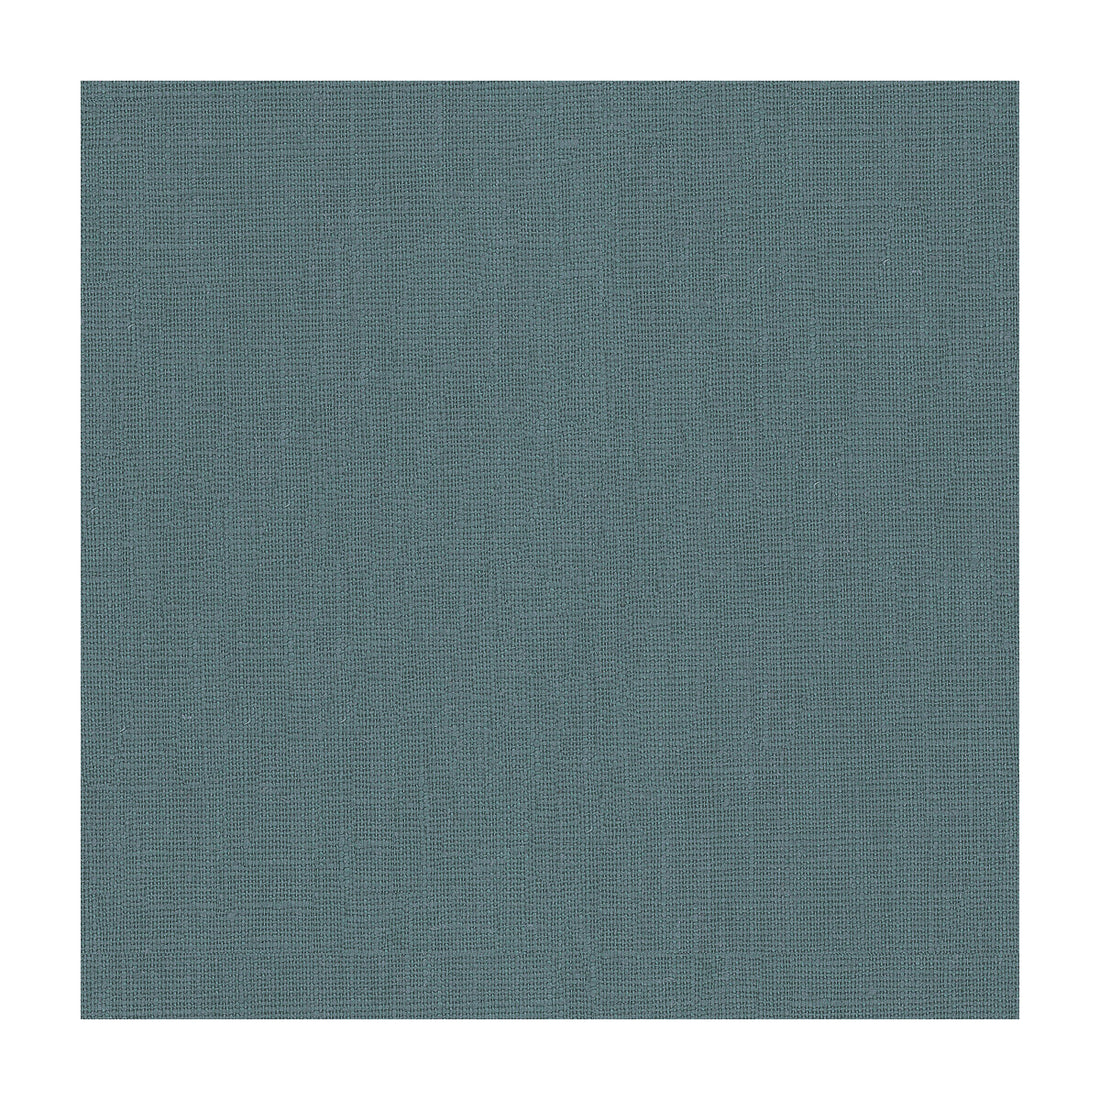 Kravet Basics fabric in 32344-1515 color - pattern 32344.1515.0 - by Kravet Basics in the Perfect Plains collection